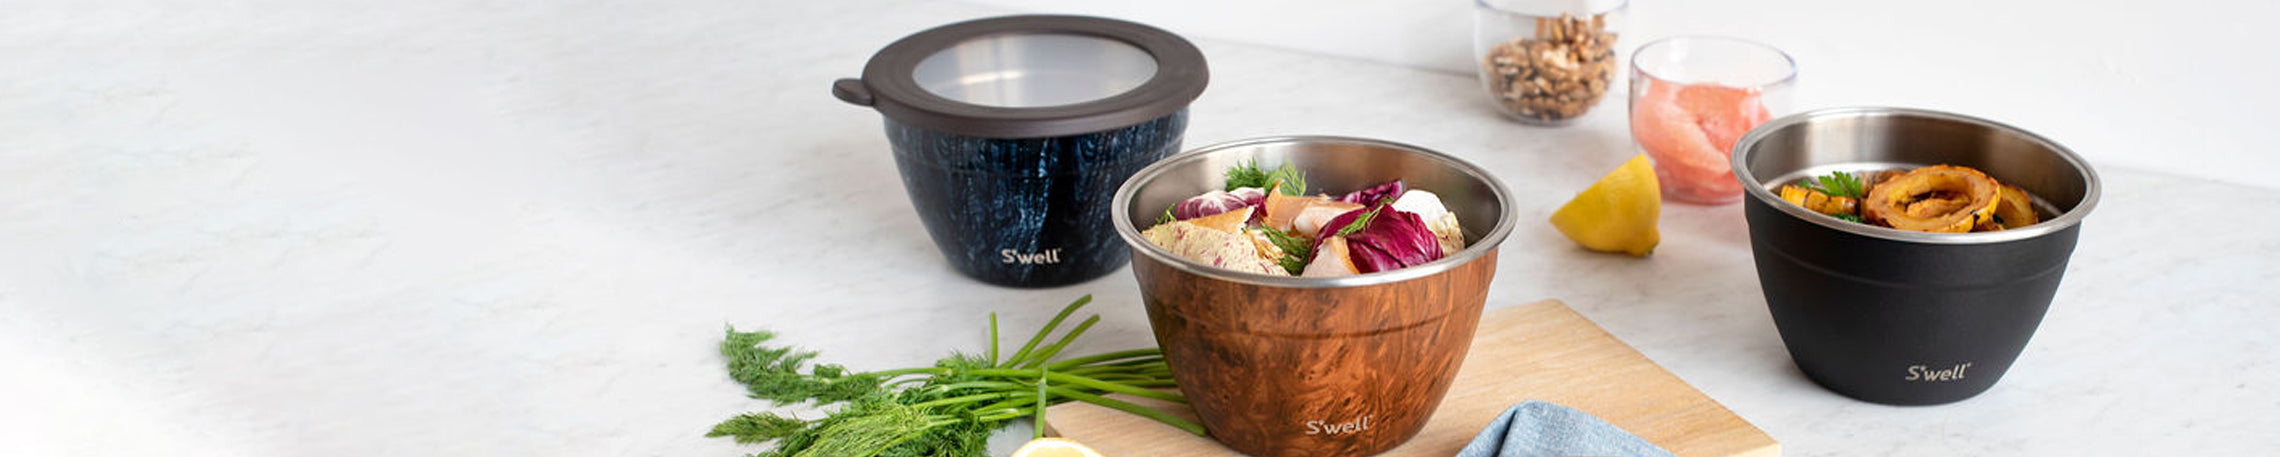  Swell Stainless Steel Salad Bowl Kit 64 Ounces Mountain Sage  Comes